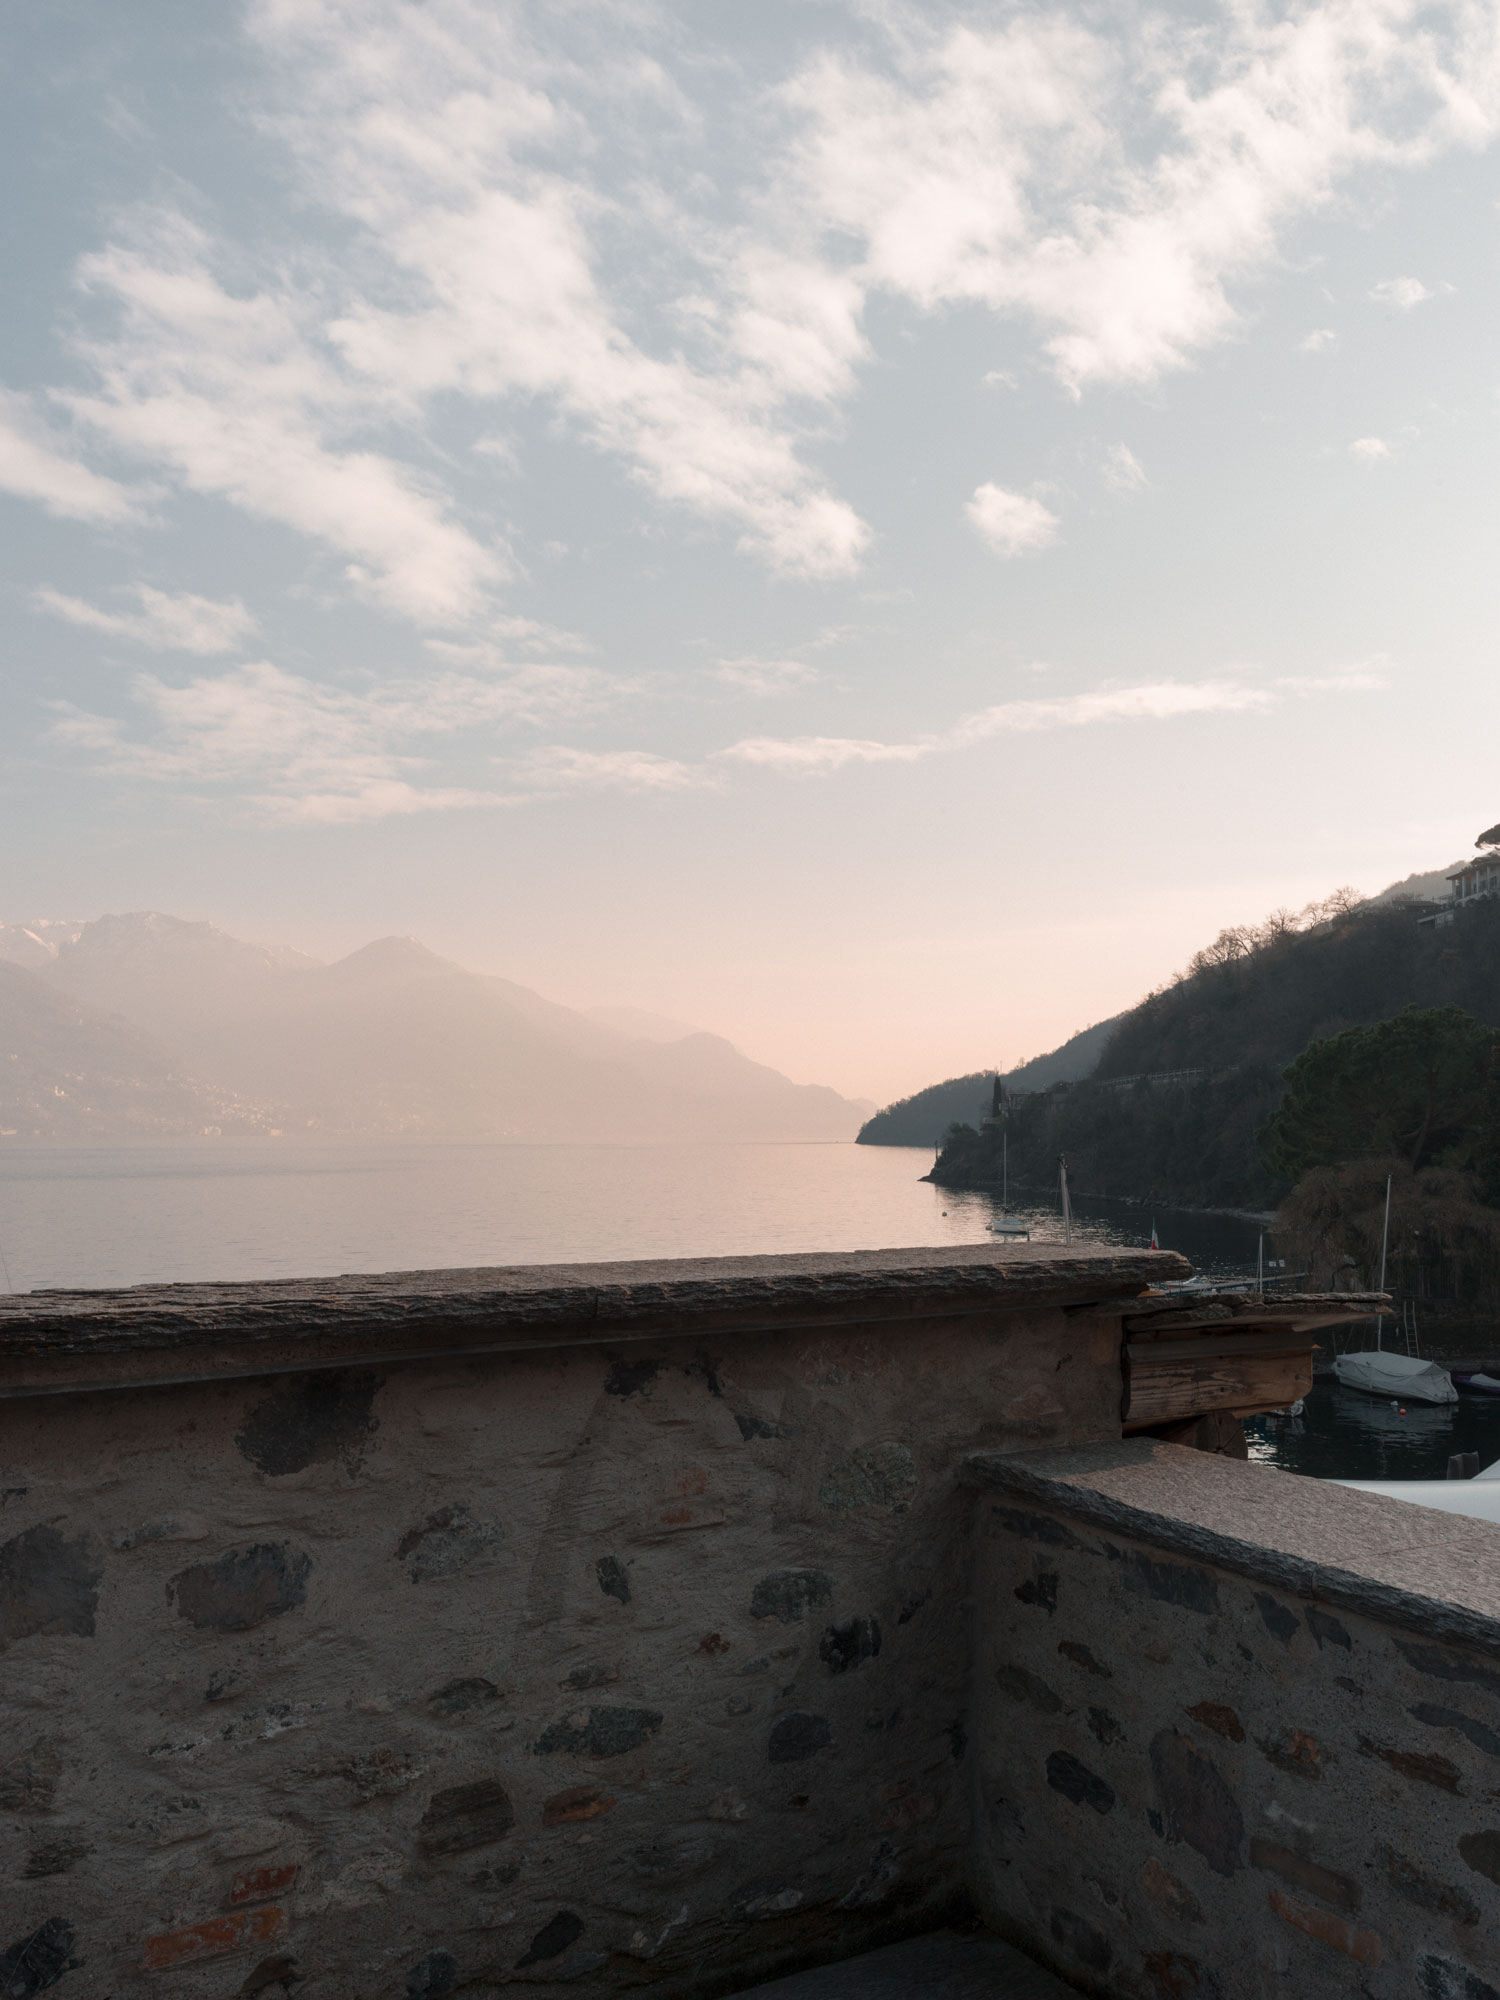 Casa Olea Hotel is a renovated old vicarage located in Cremia, Lake Como - Italy. The most prestigious and spacious corner suite features an impressive view of the front lake terrace overlooking the courtyard garden.